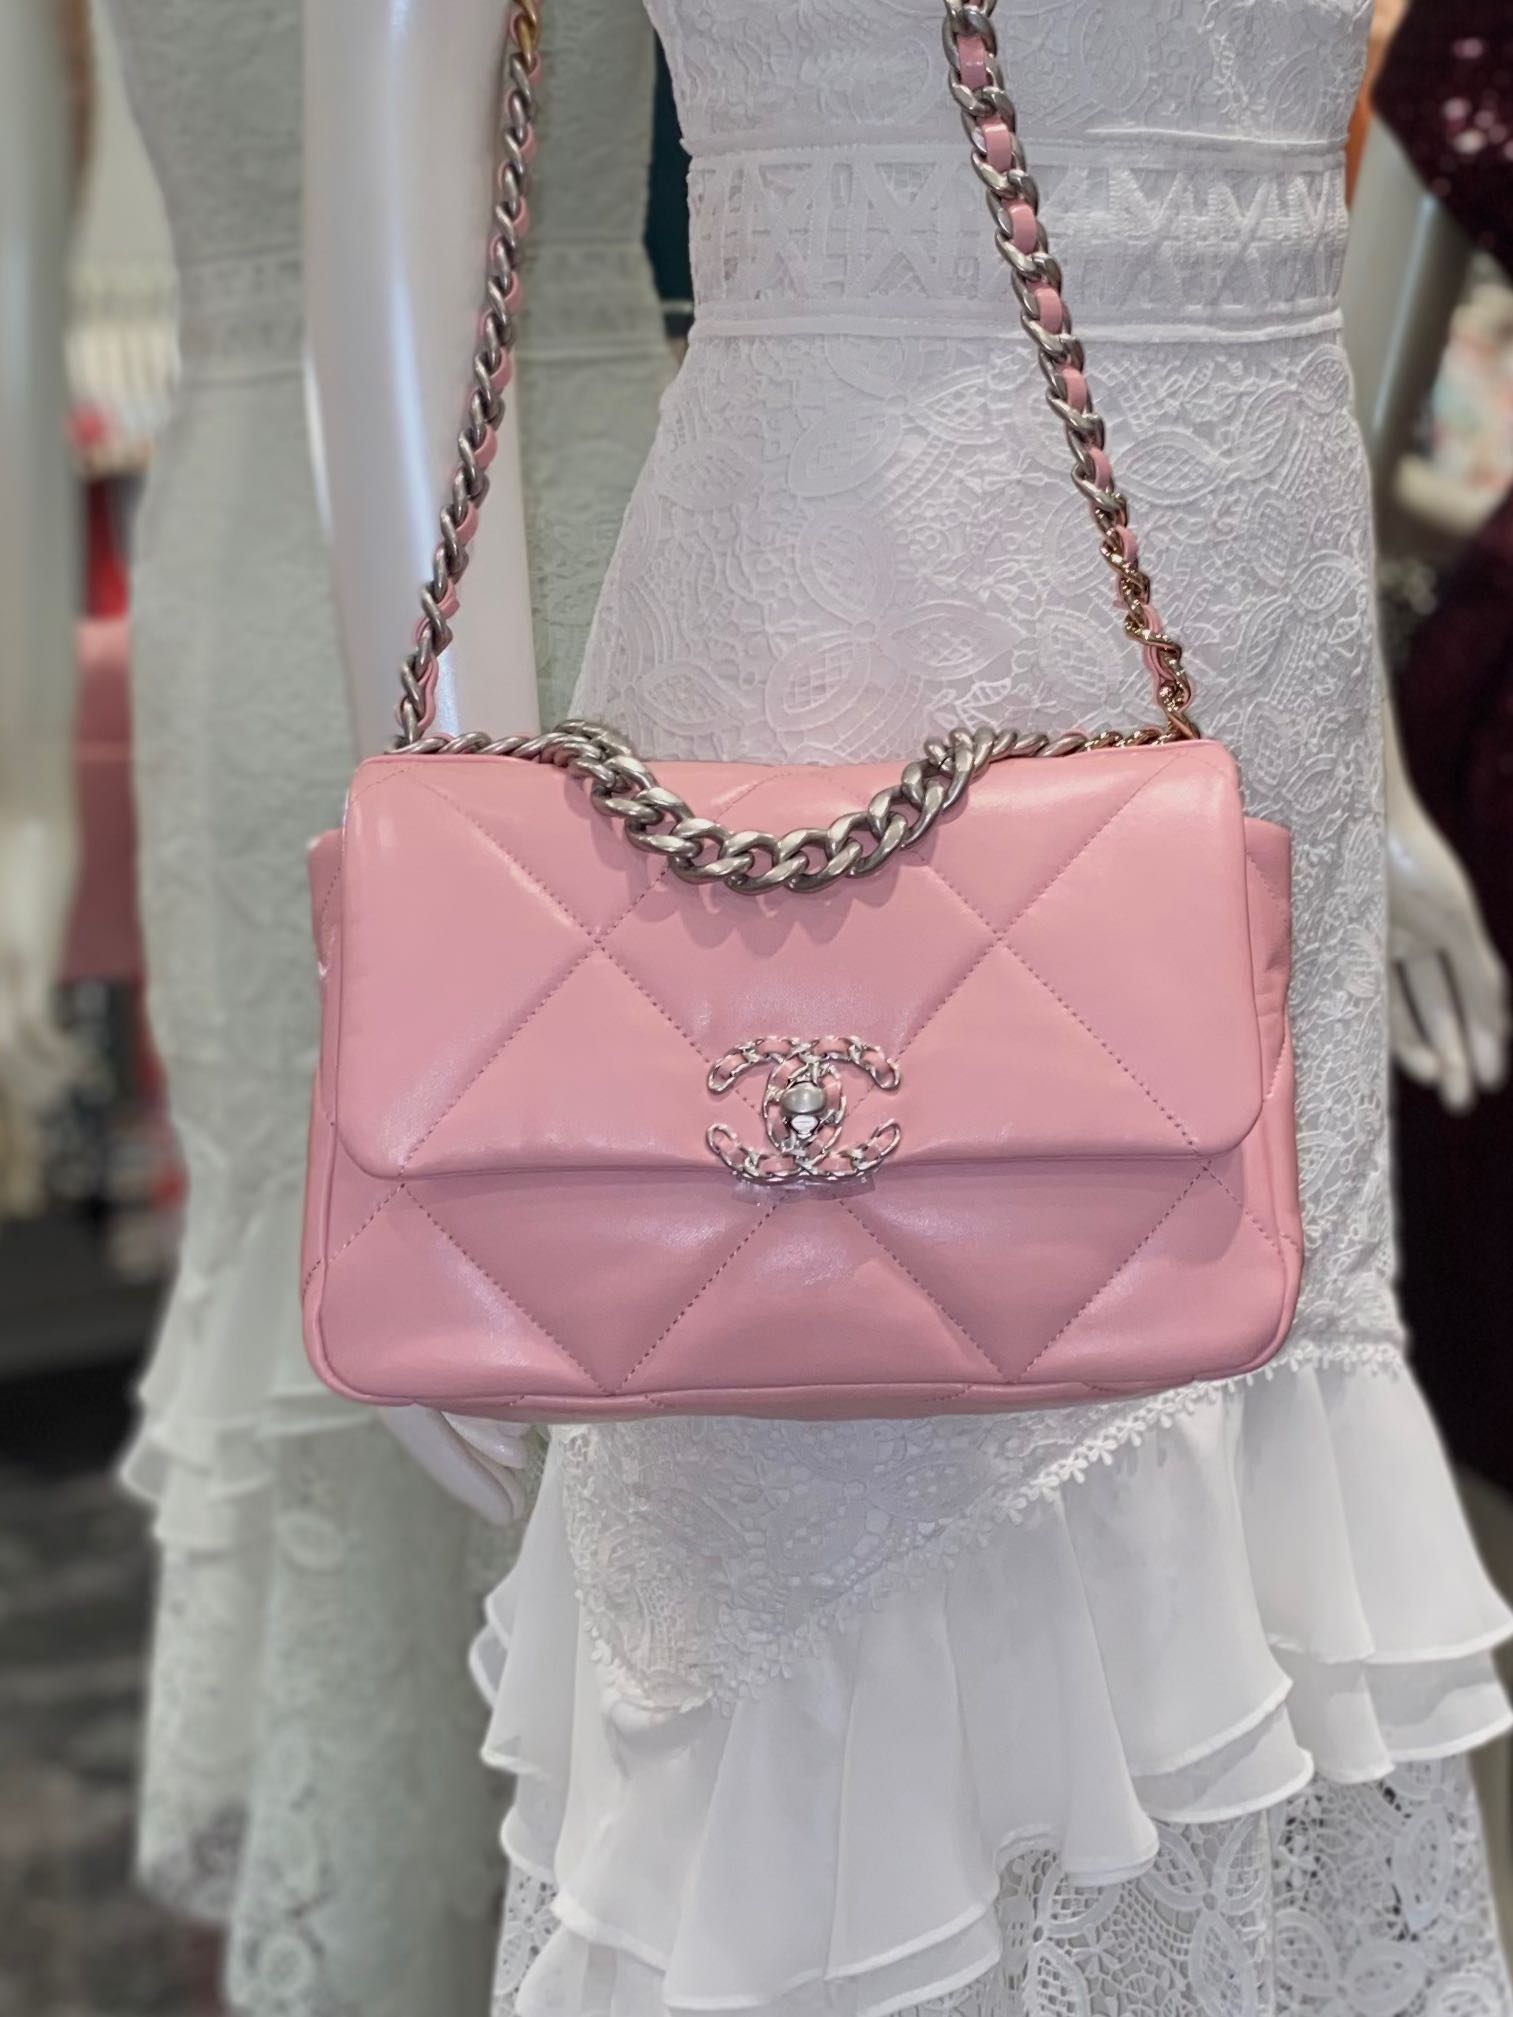 New 🦄 Chanel 19 bag 22C small baby pink silver gold hardware